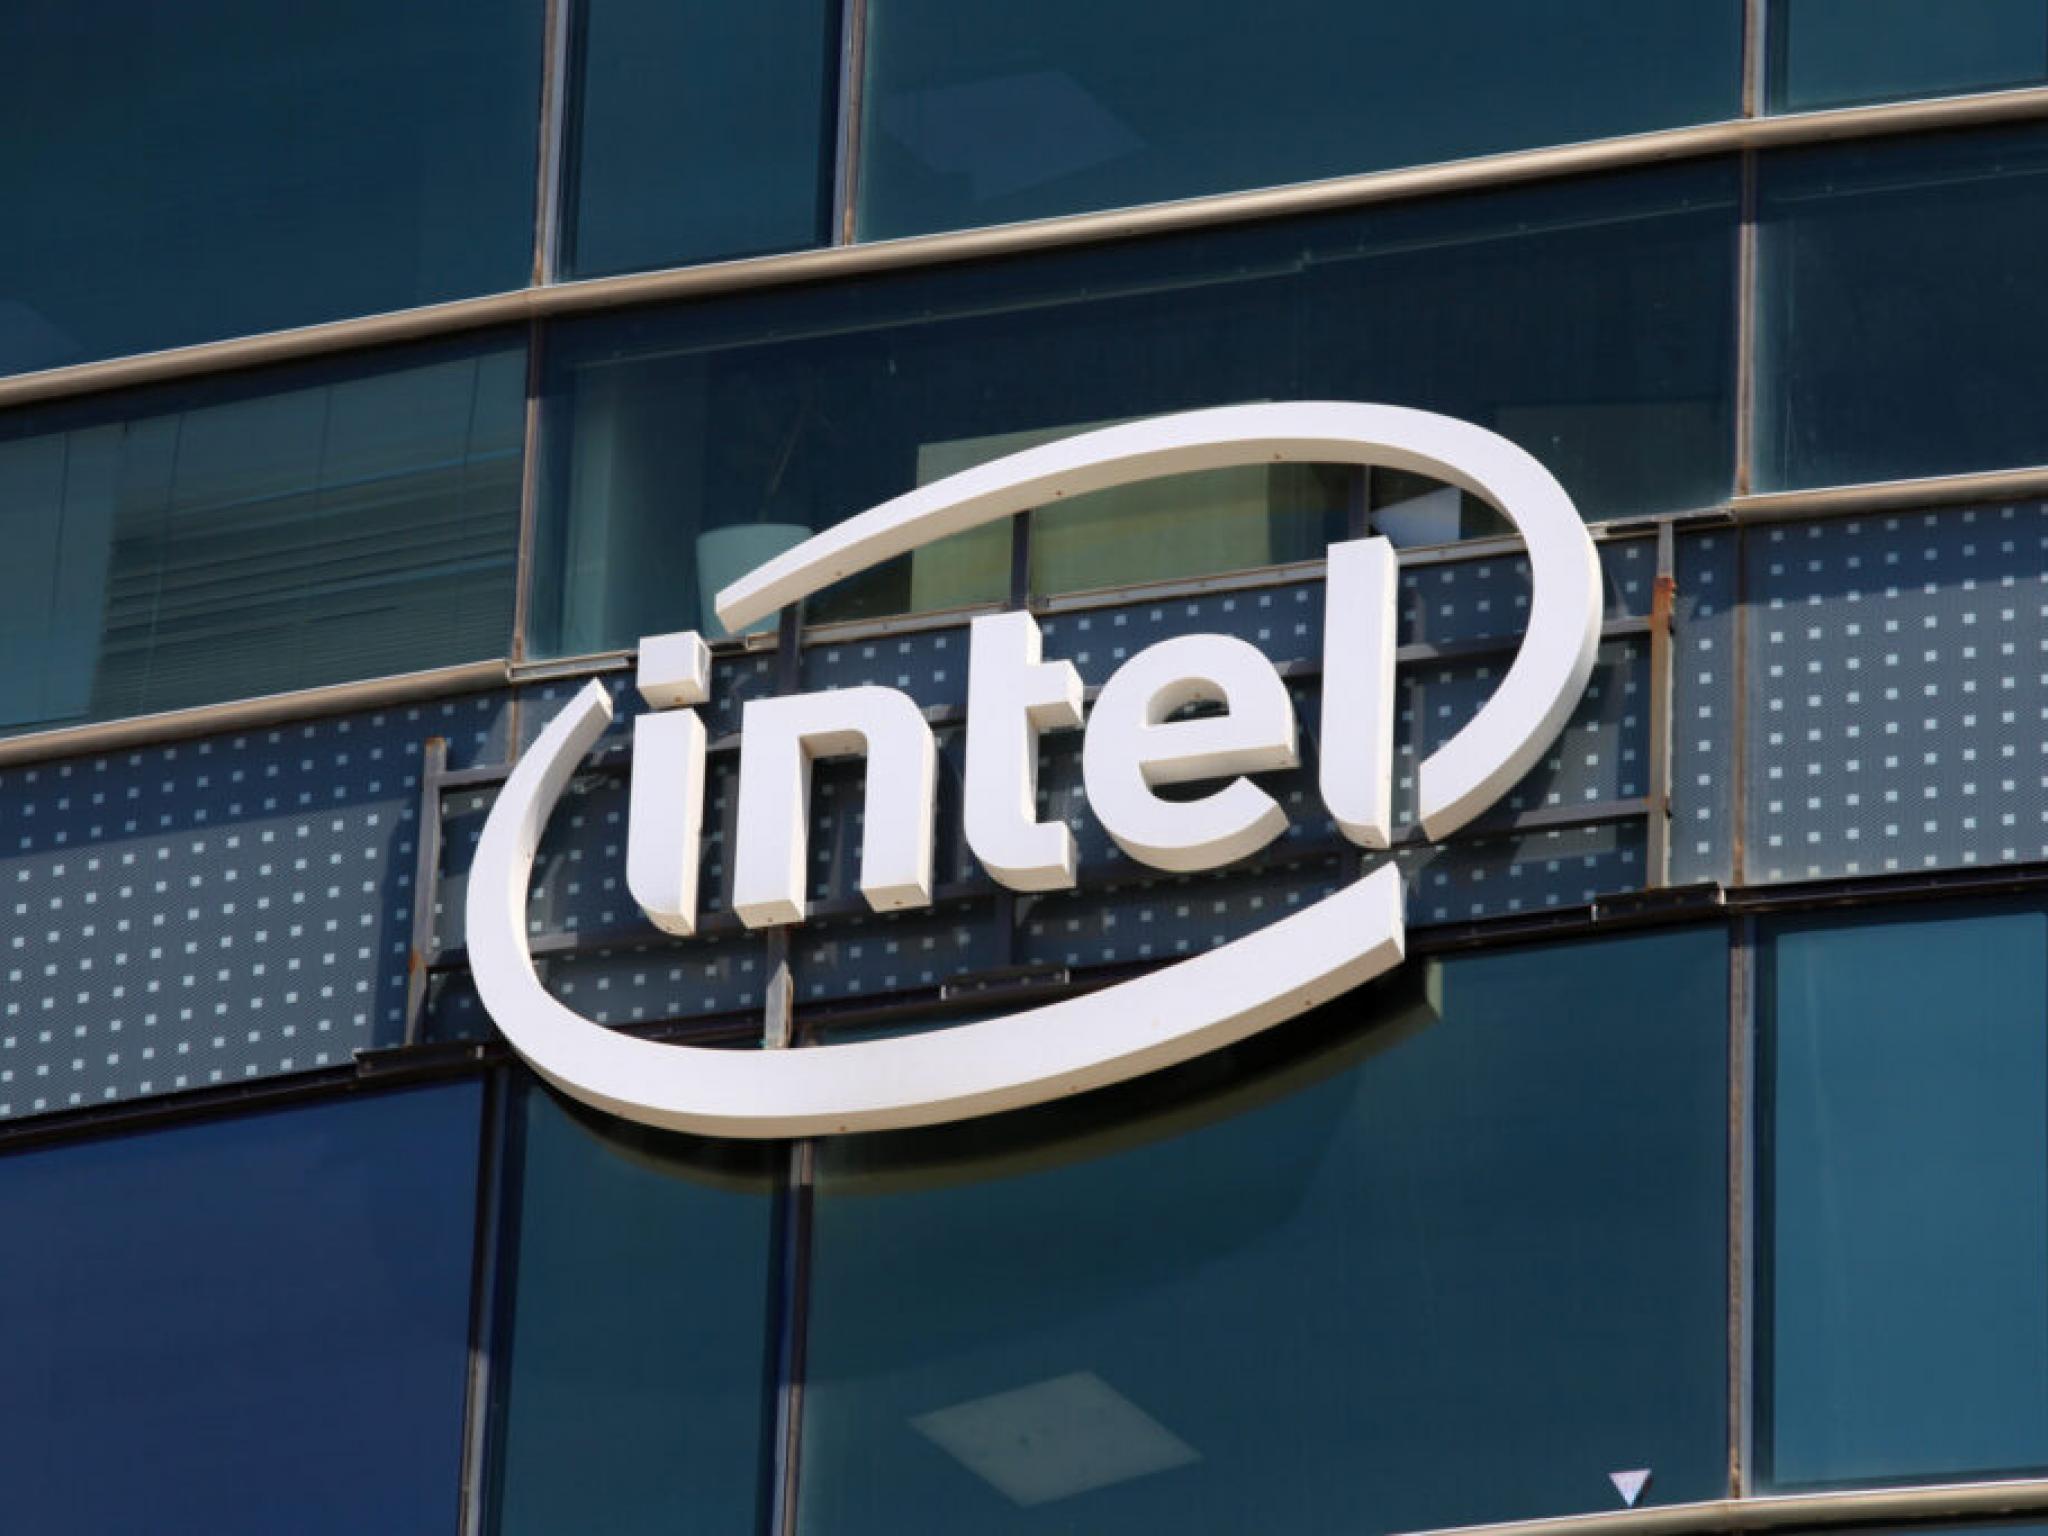  intel-analyst-flags-amd-competition-as-key-challenge-predicts-modest-growth-for-q2 